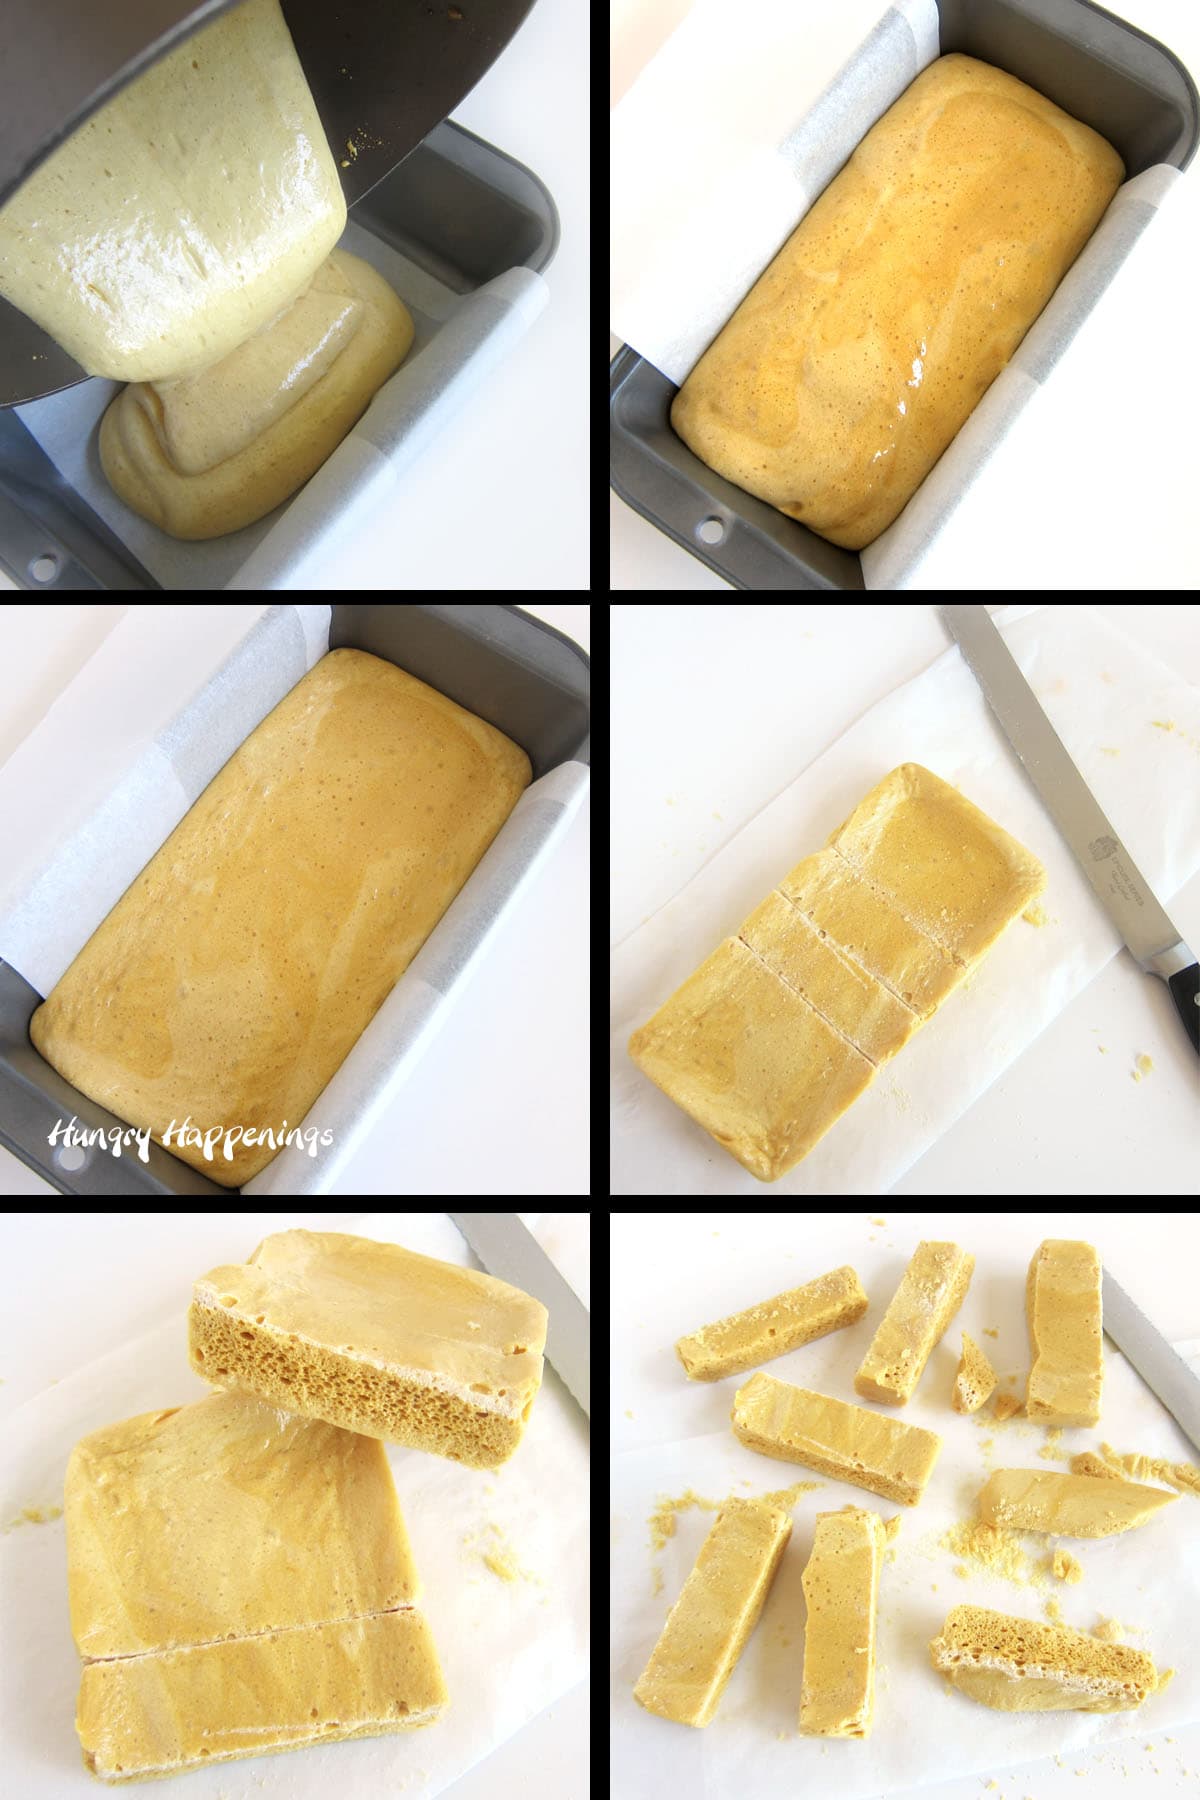 pour honeycomb candy into pan then cut into candy bars